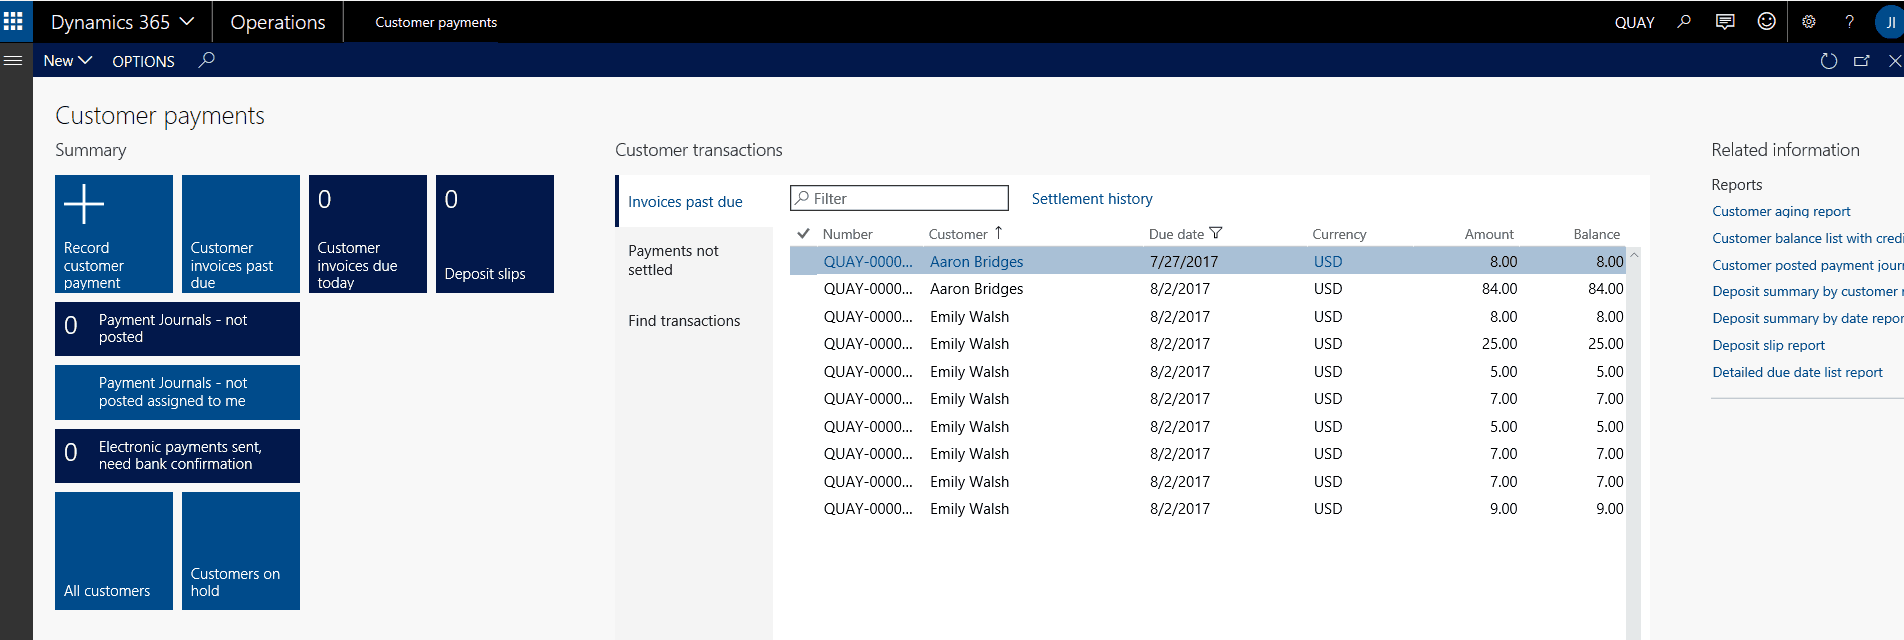 Customer Payments Workspace in Dynamics 365